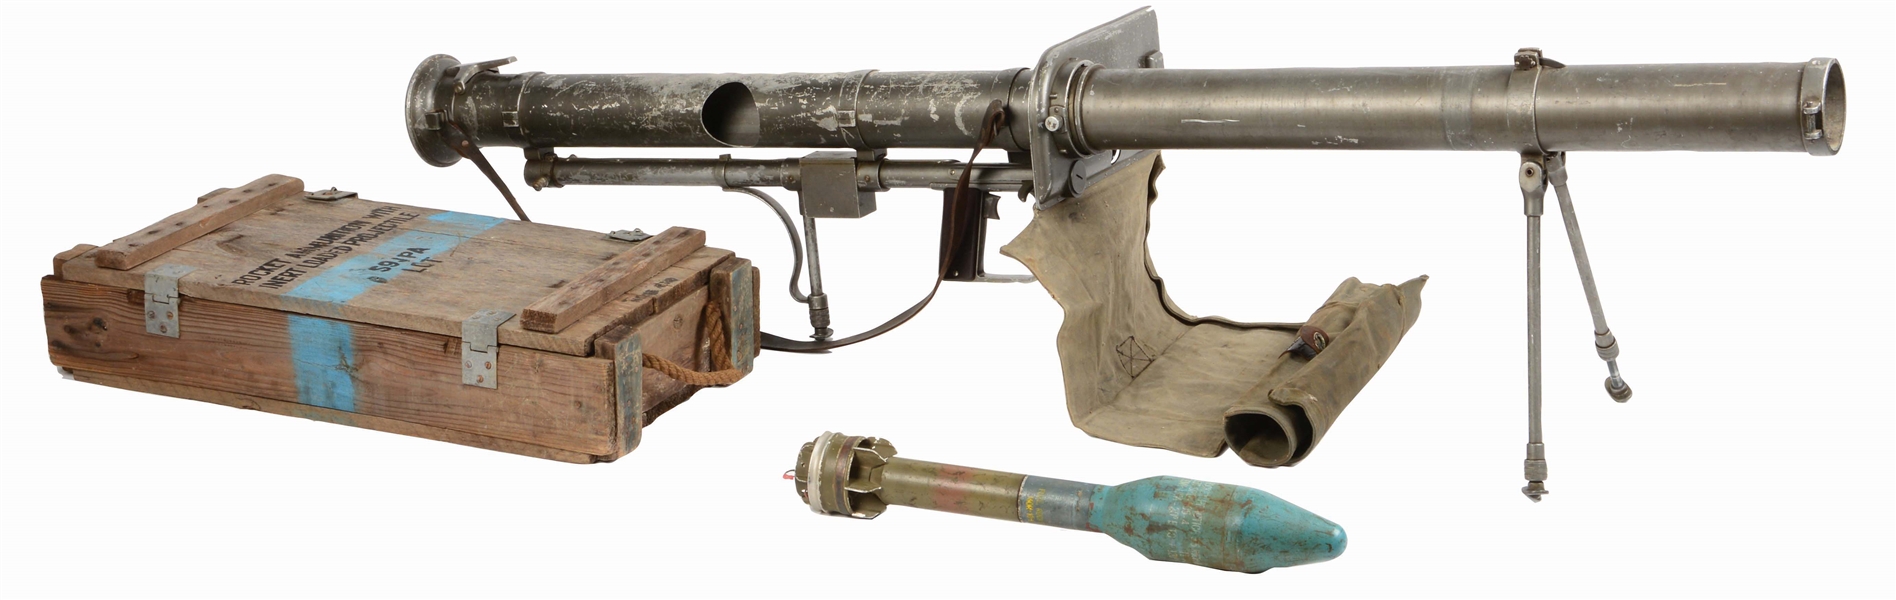 M65 BAZOOKA WITH CARRY CRATE AND INERT ROCKET.